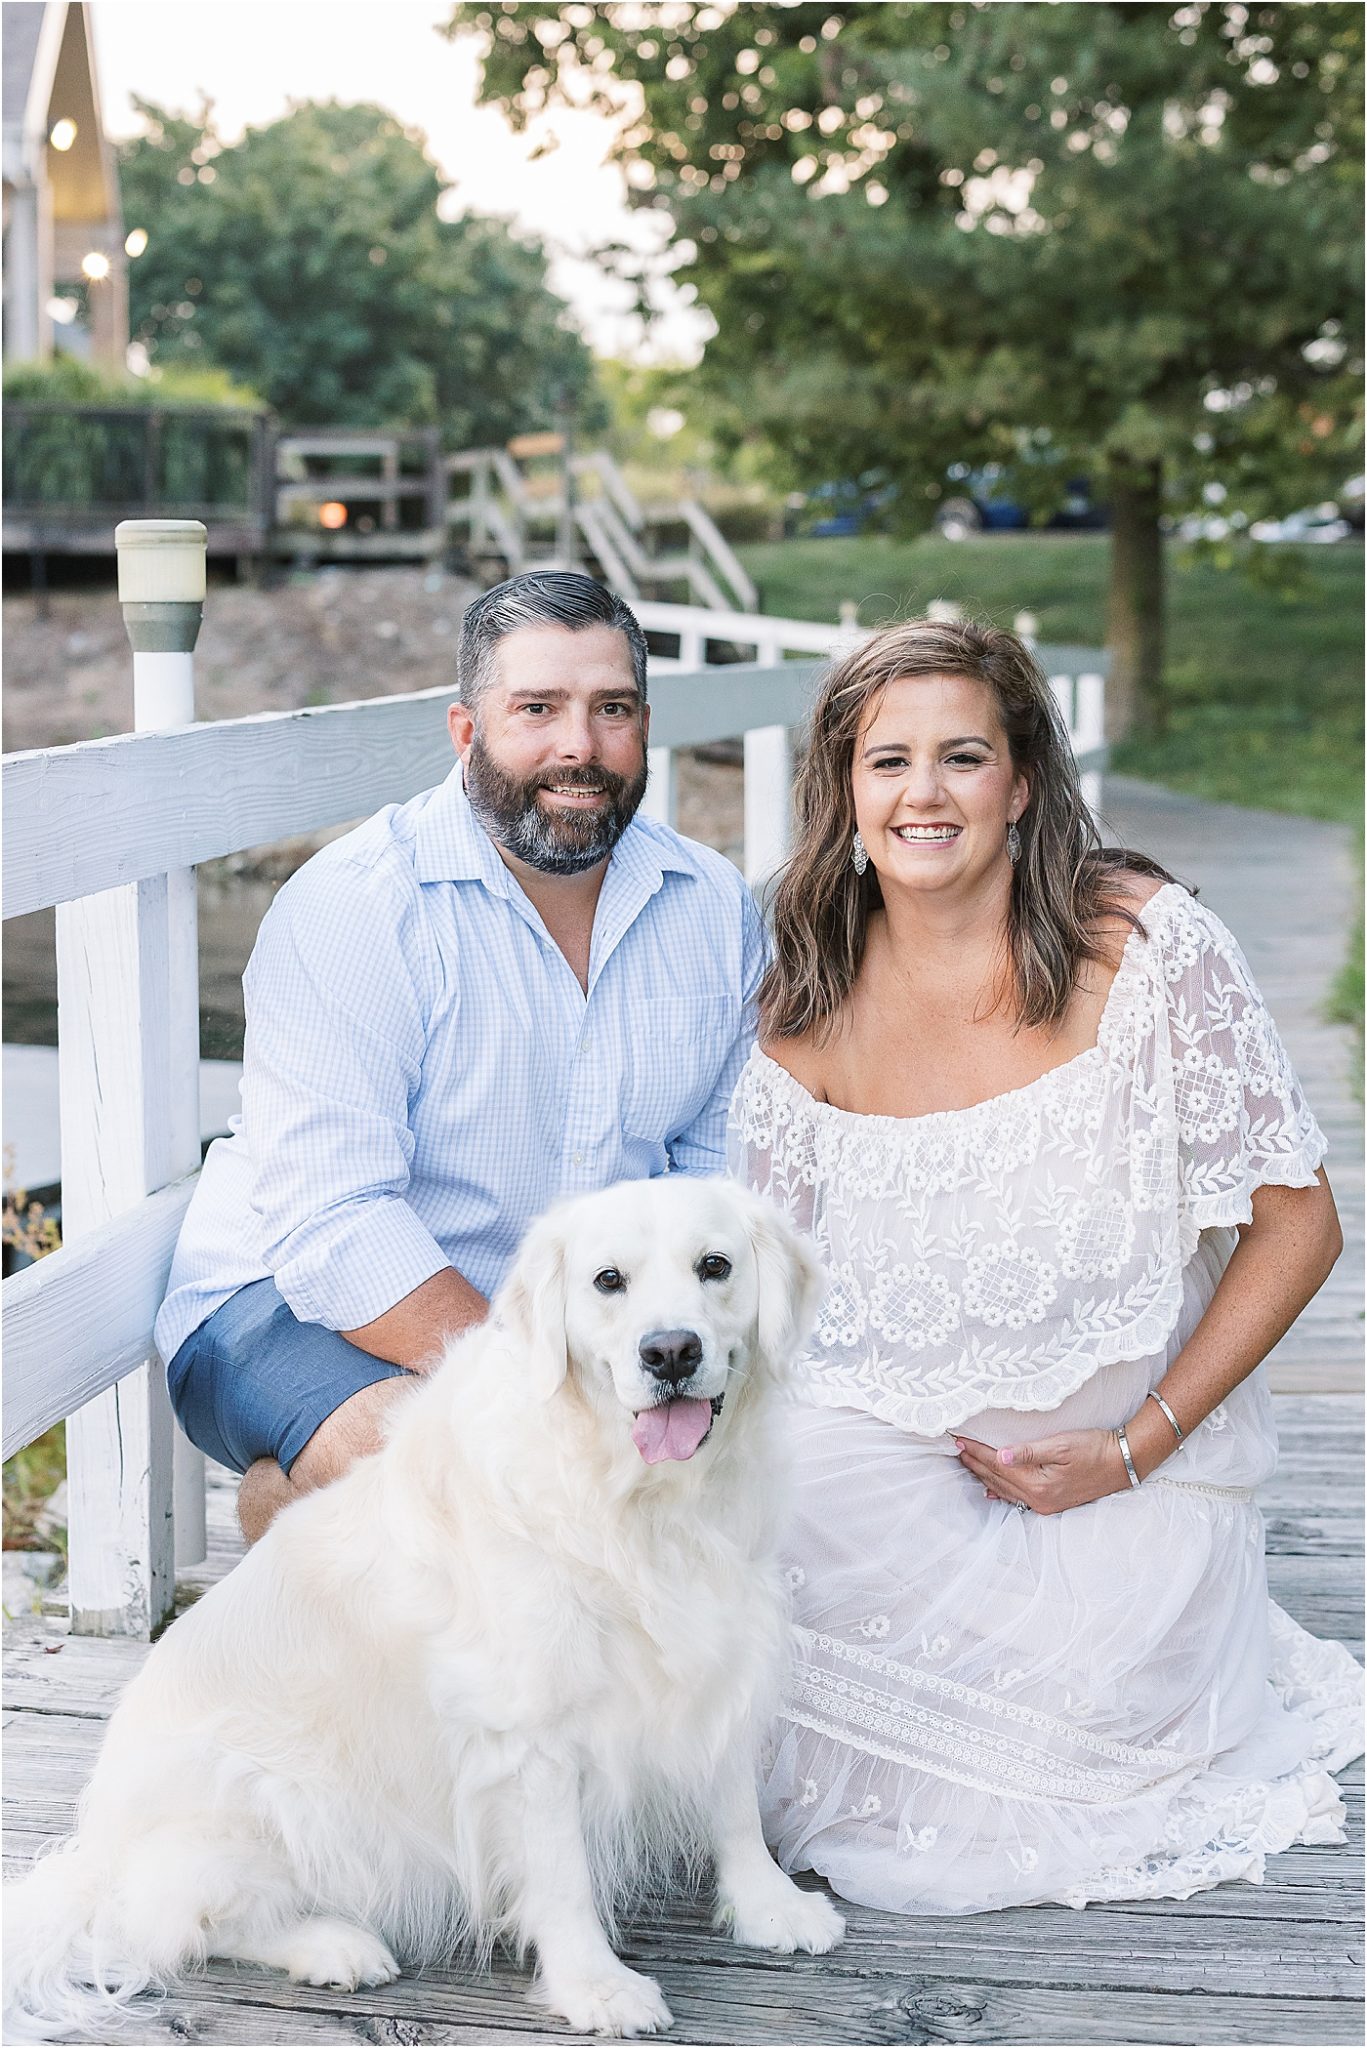 Expecting parents with family dog at maternity session | Lindsay Konopa Photography